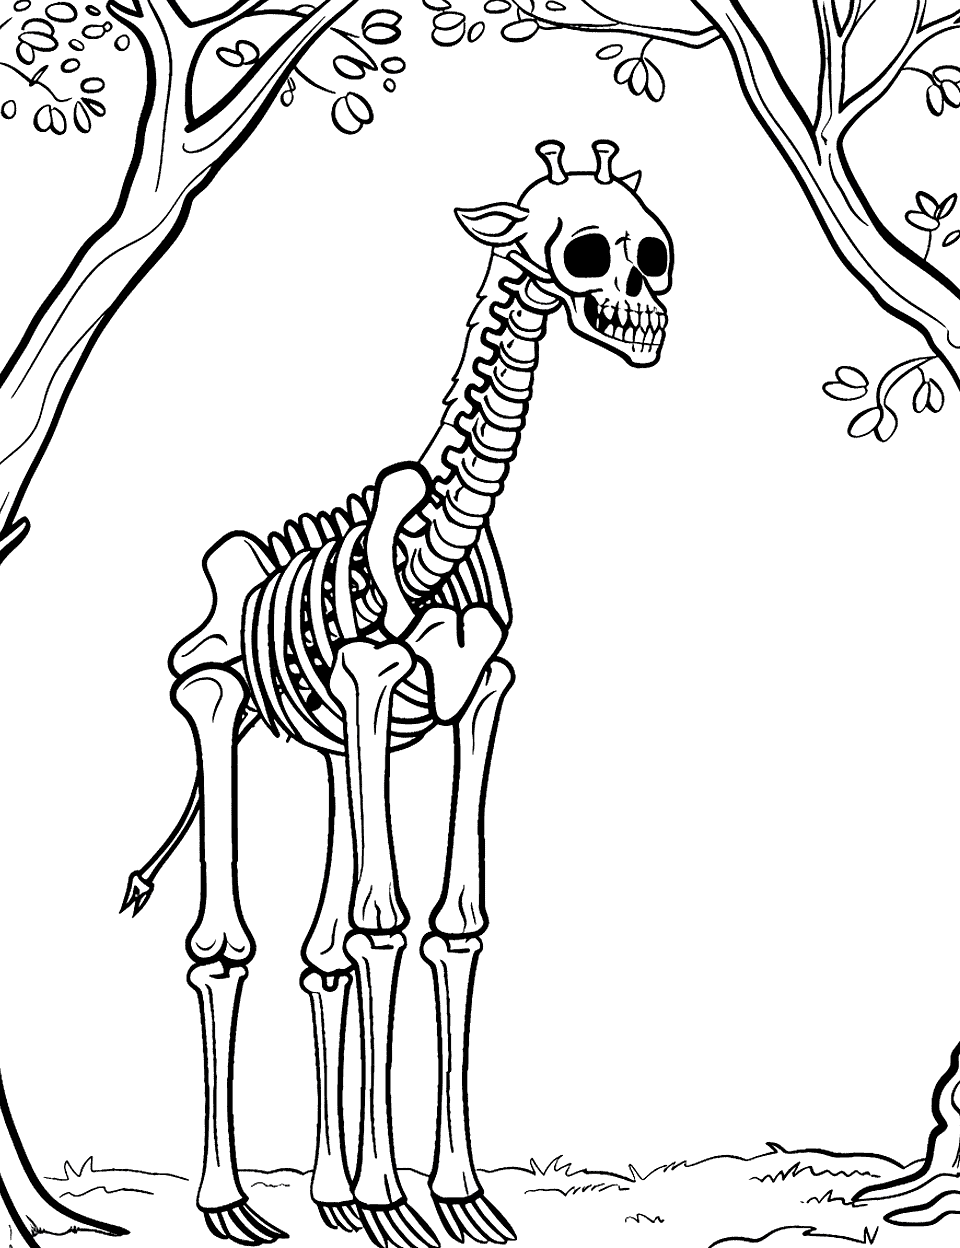 Giraffe Skeleton Looking Over Trees Coloring Page - A giraffe skeleton peering over trees, showcasing its long neck.